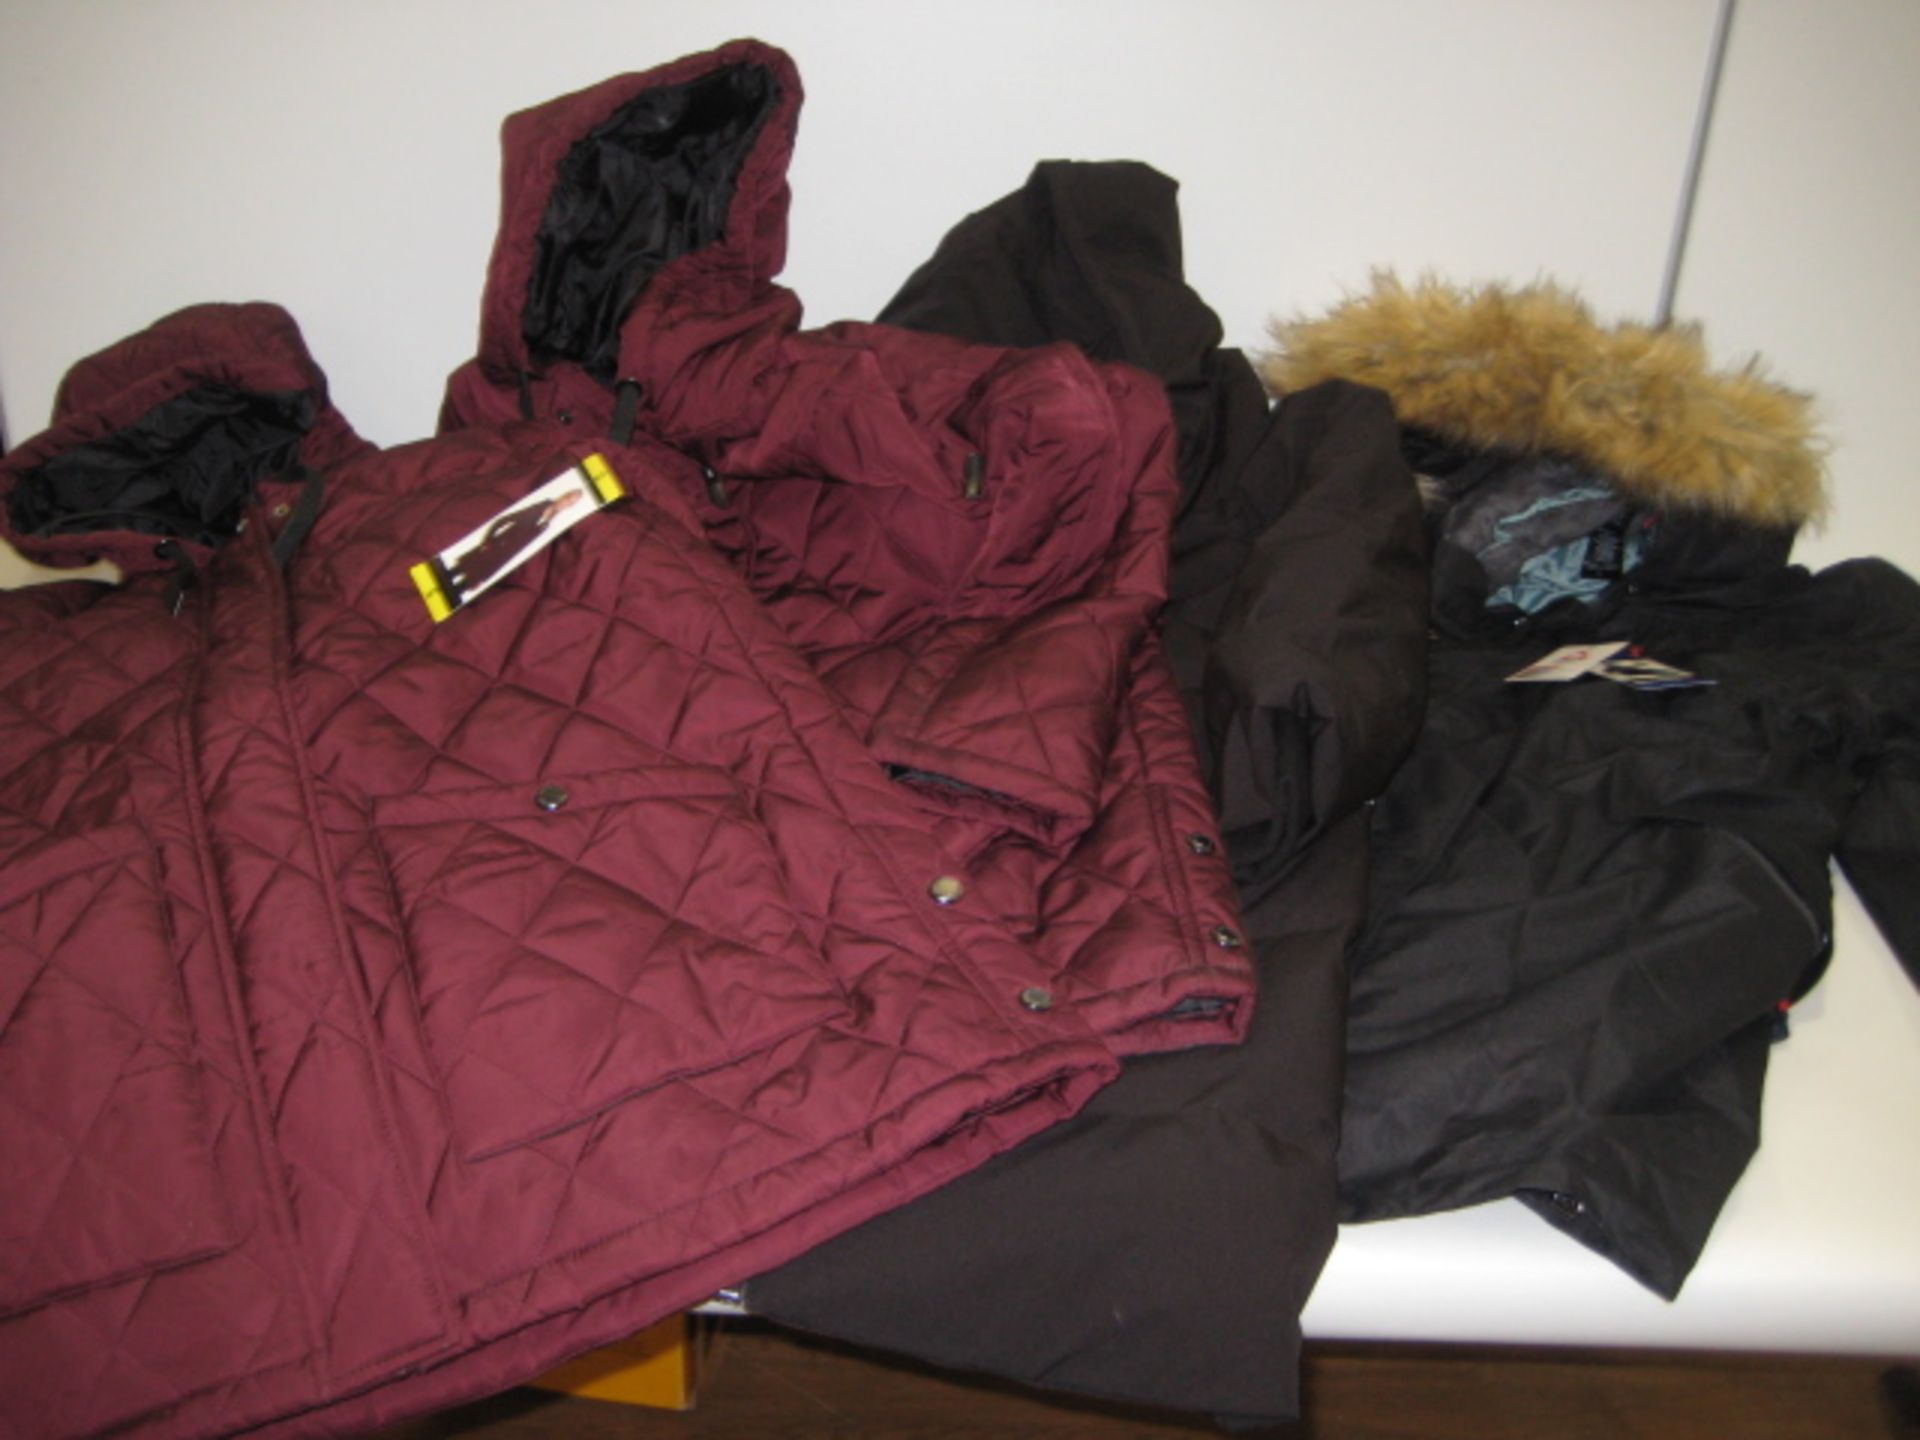 4 ladies parka style coats, 2 by Weatherproof, 1 by DKNY and 1 by Gerry, sizes ranging from S - L (1